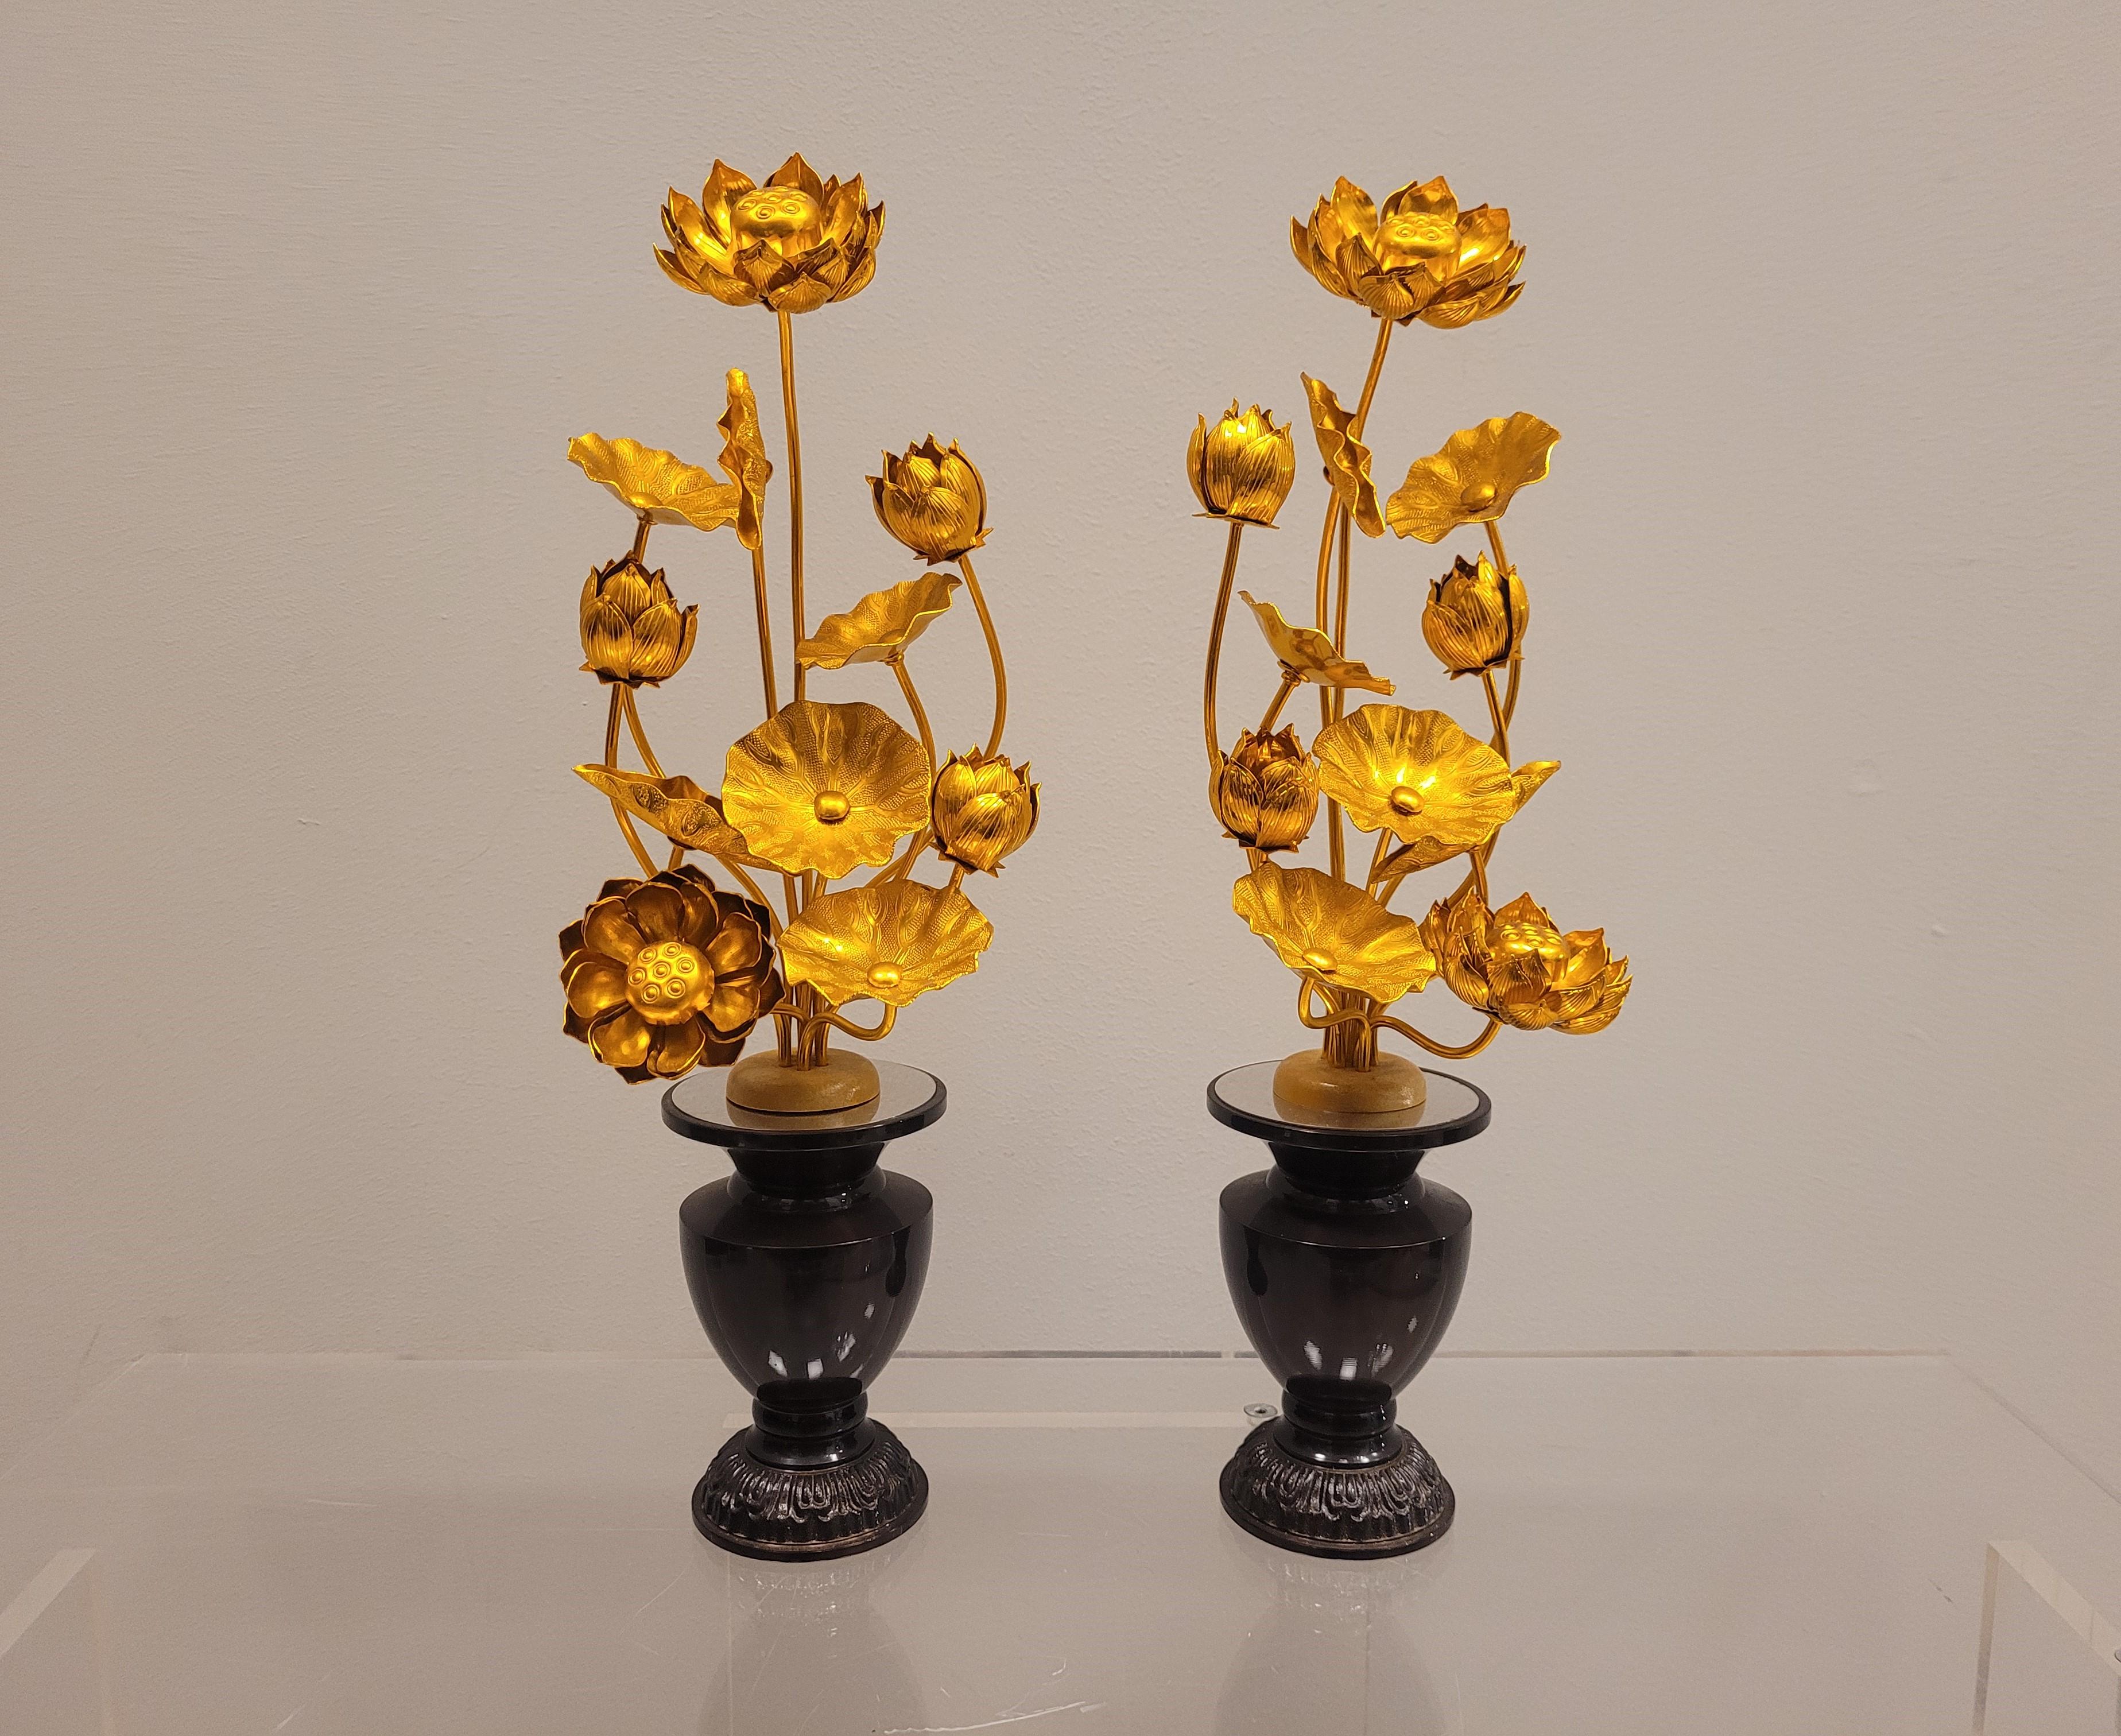 Spectacular pair of temple vases filled with golden lotus flowers. This set is called 